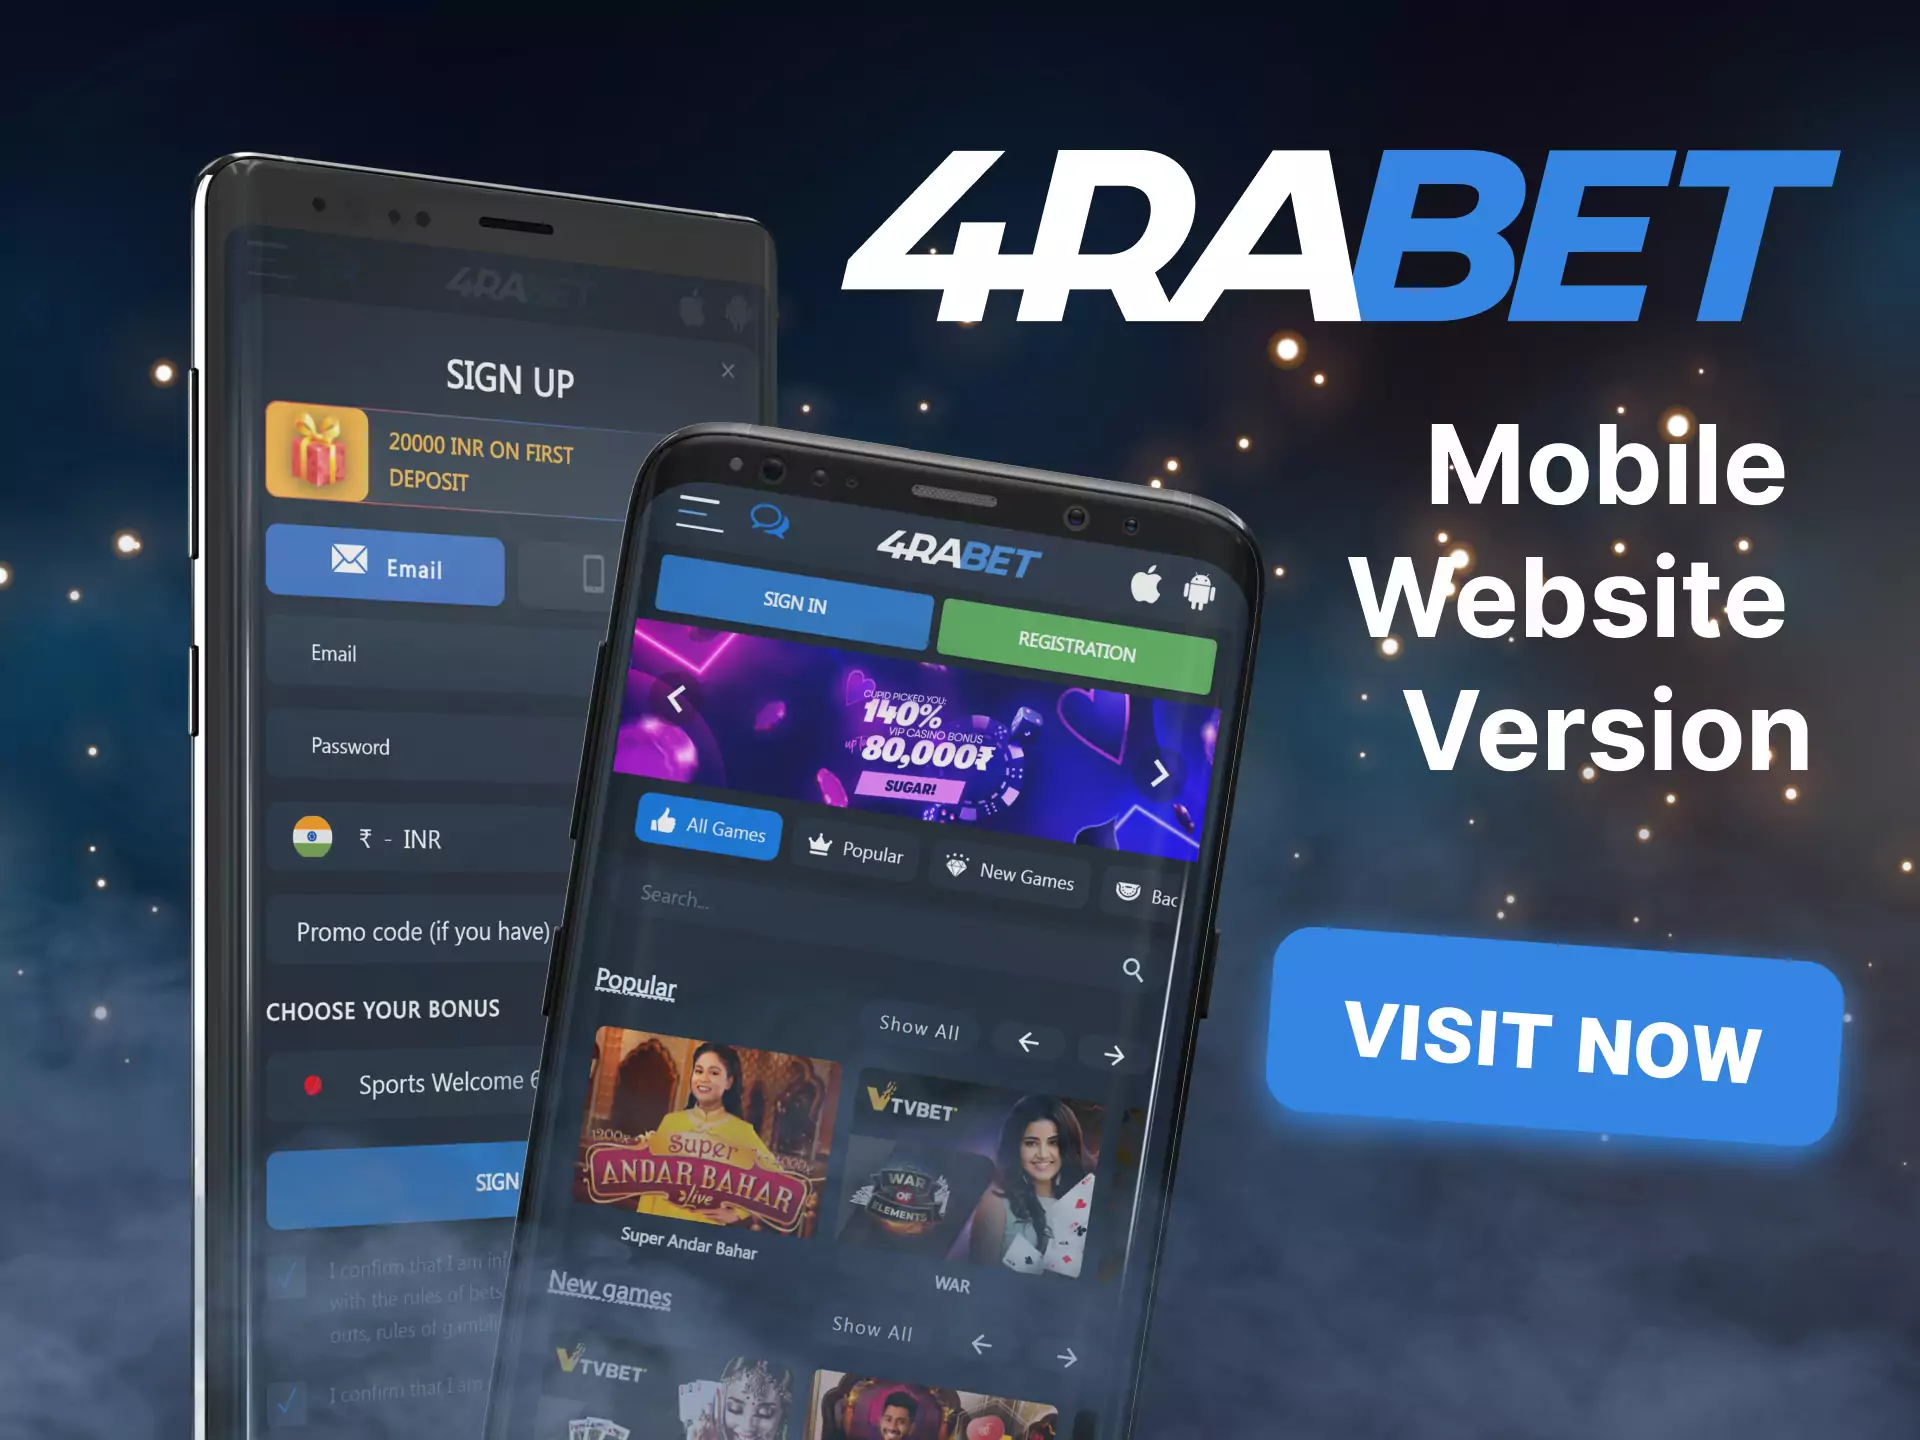 Play casino and bet in the mobile version of the site 4rabet.